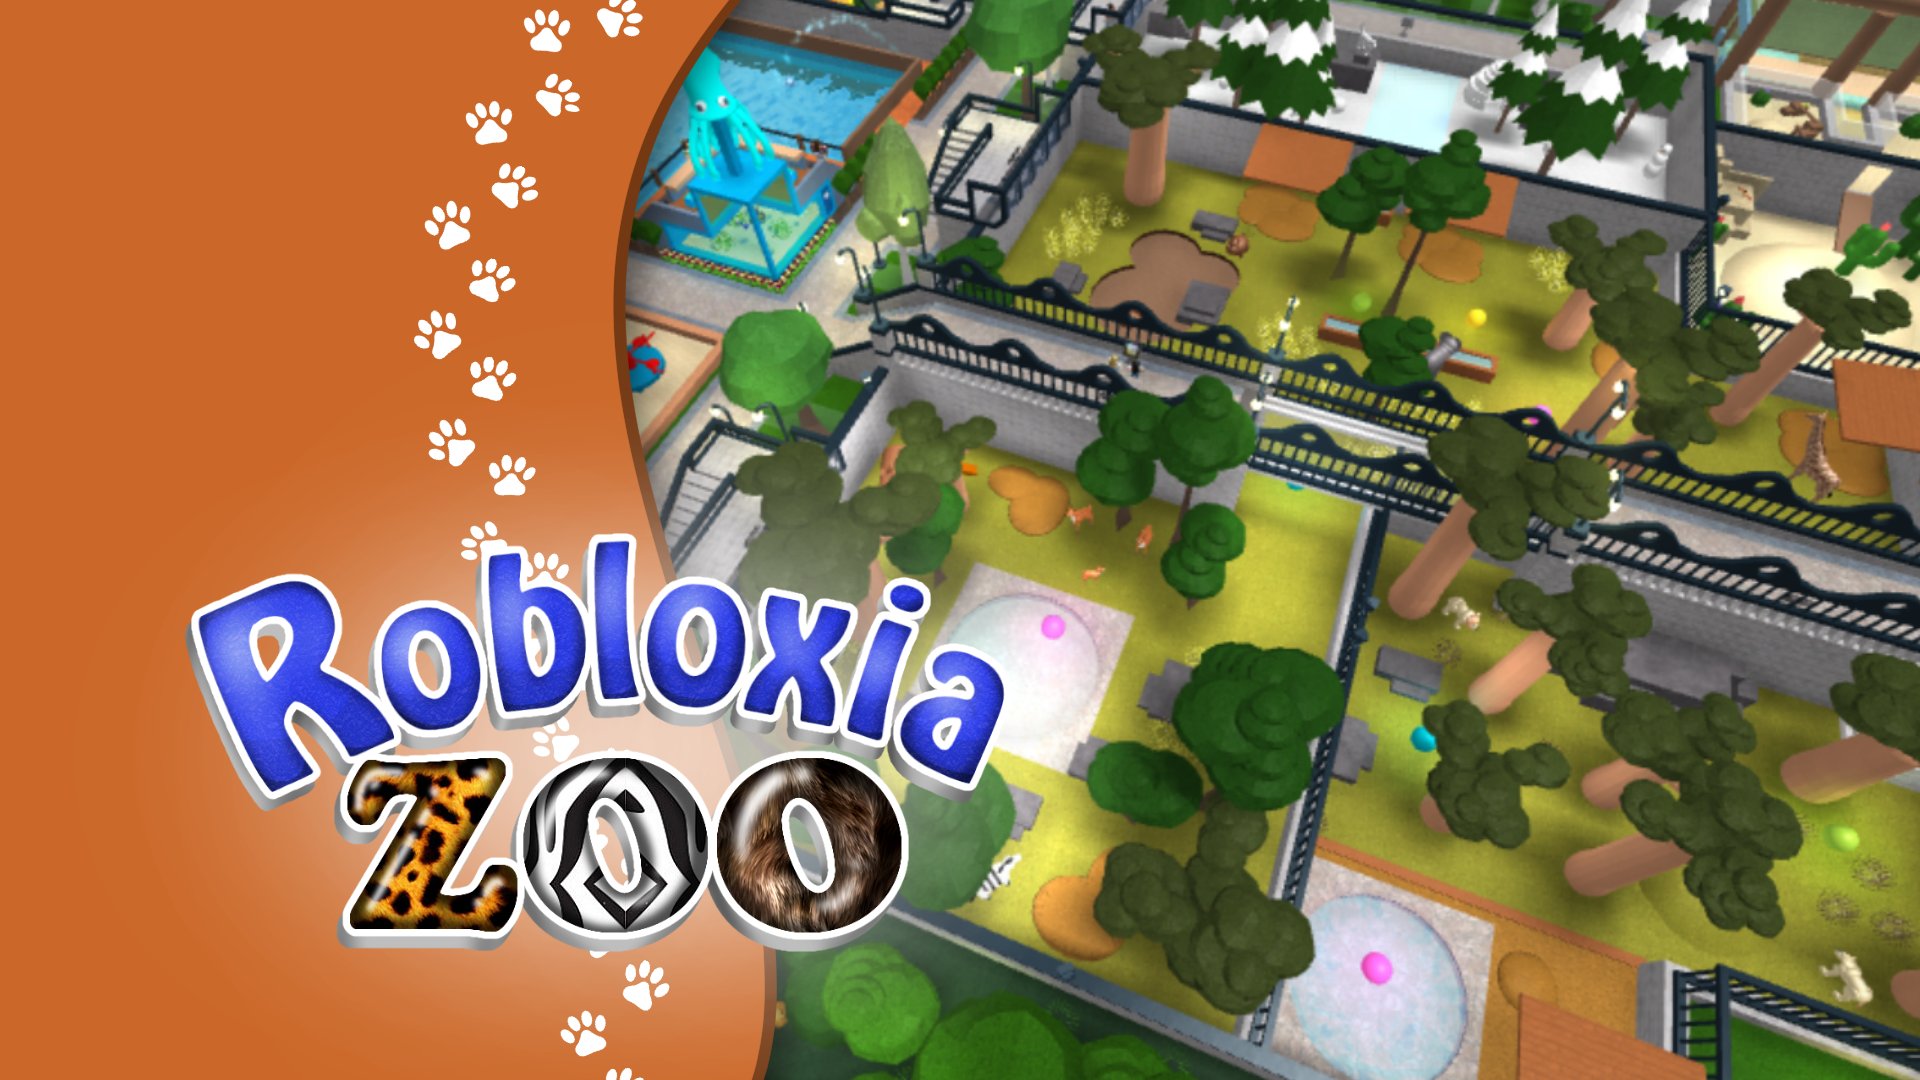 Mimi Dev On Twitter Check Out The New New Update For Robloxia Zoo All New Lobby Map Improvements And More Https T Co Fvq6zjdeof Robloxdev Roblox Https T Co Btdbv3jath - roblox robloxia zoo